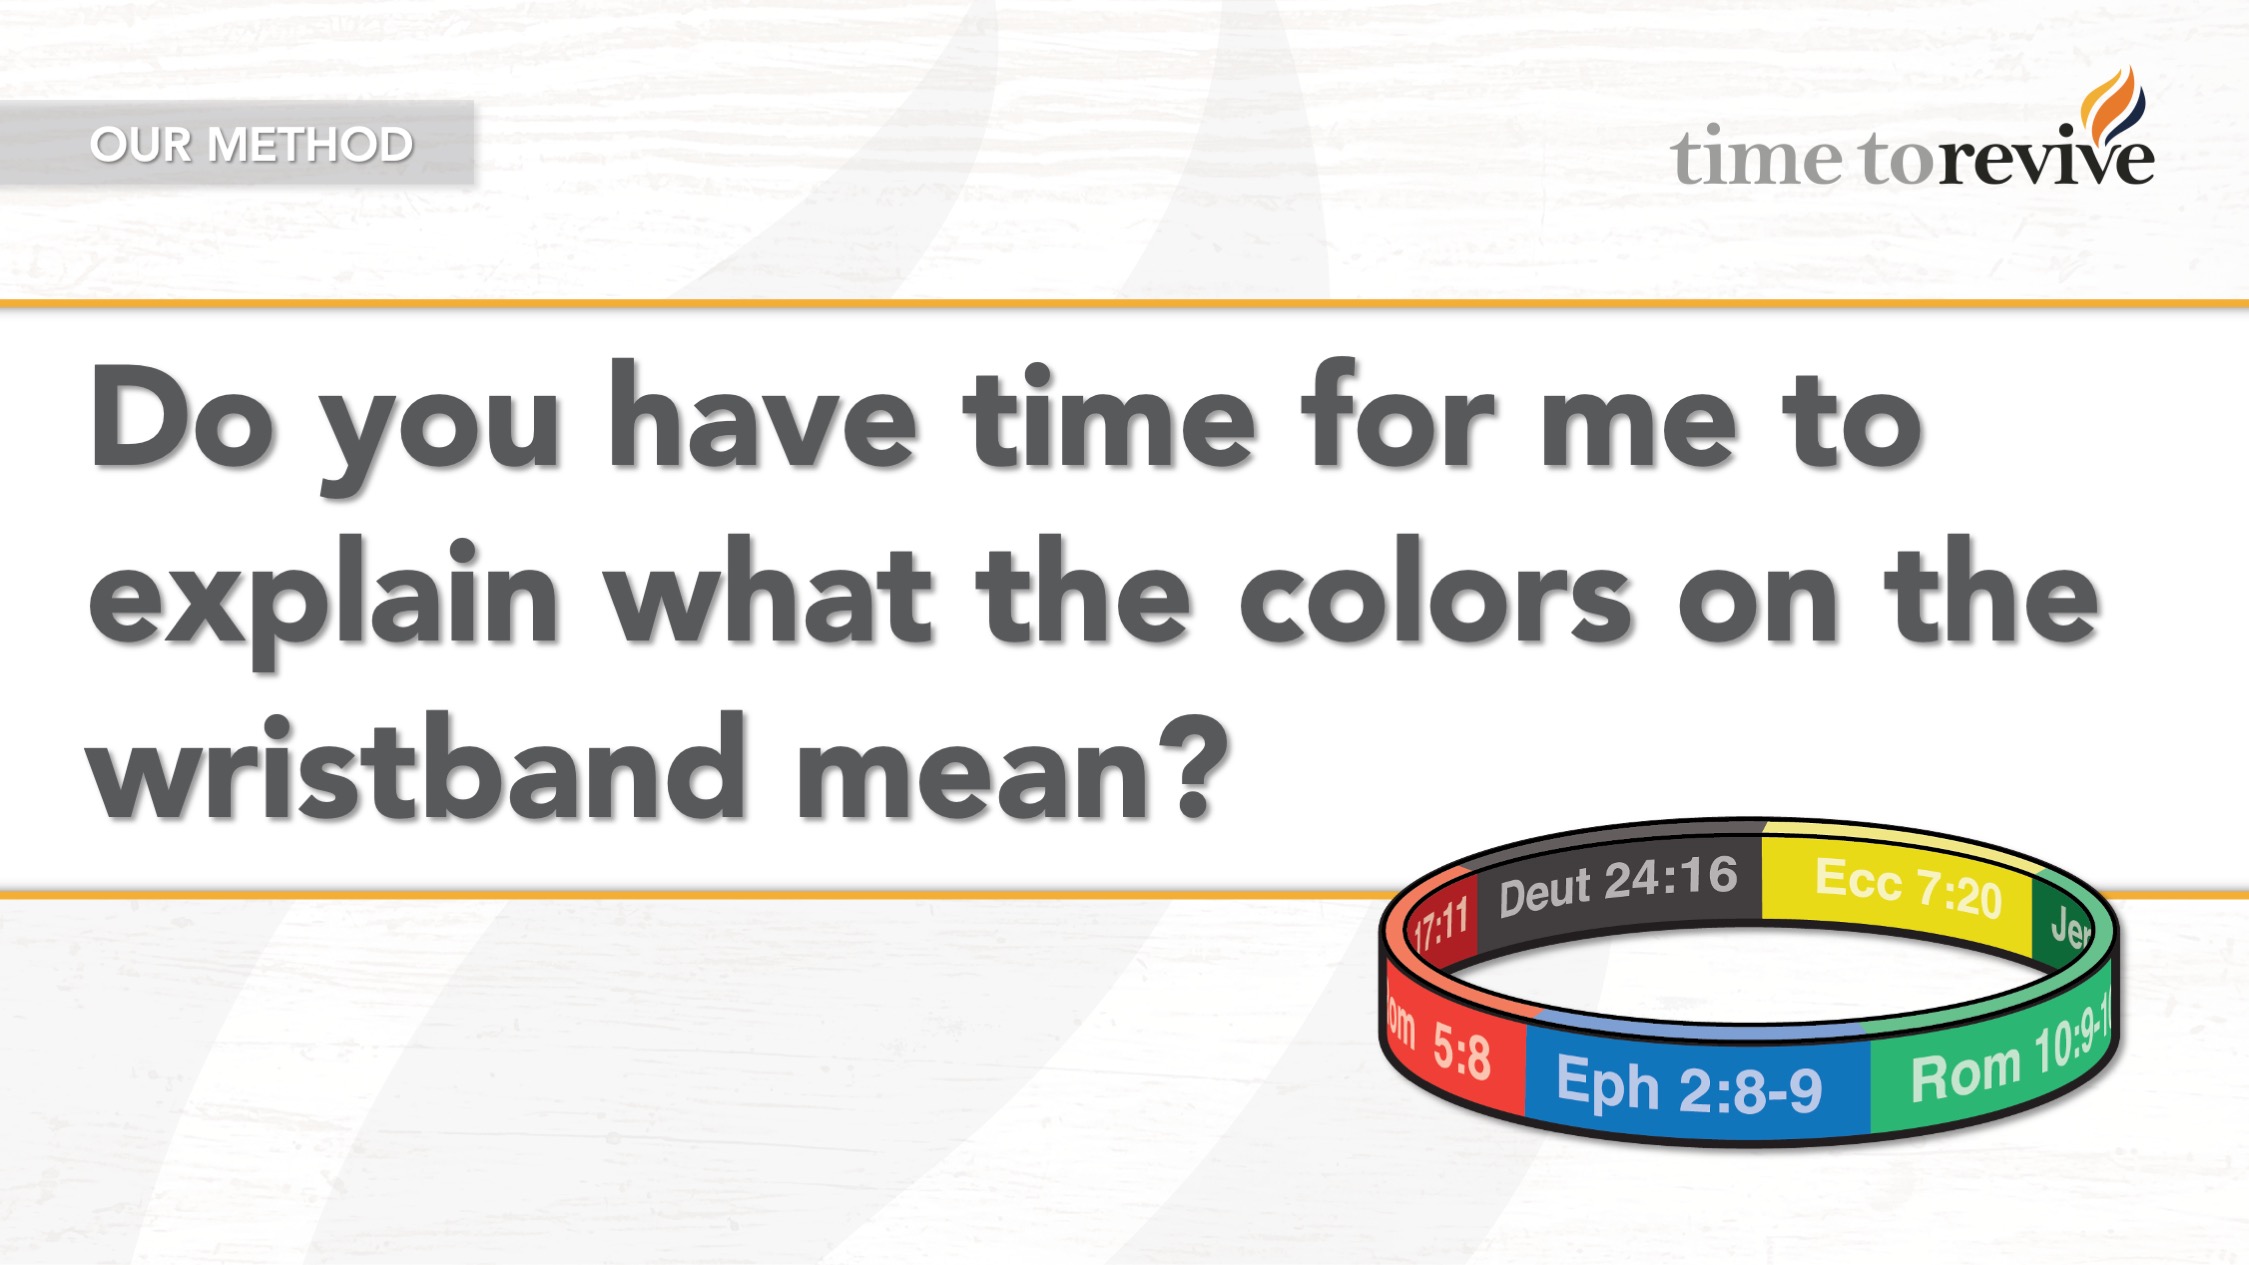 Do you have time for me to explain what the colors on the wristband mean?